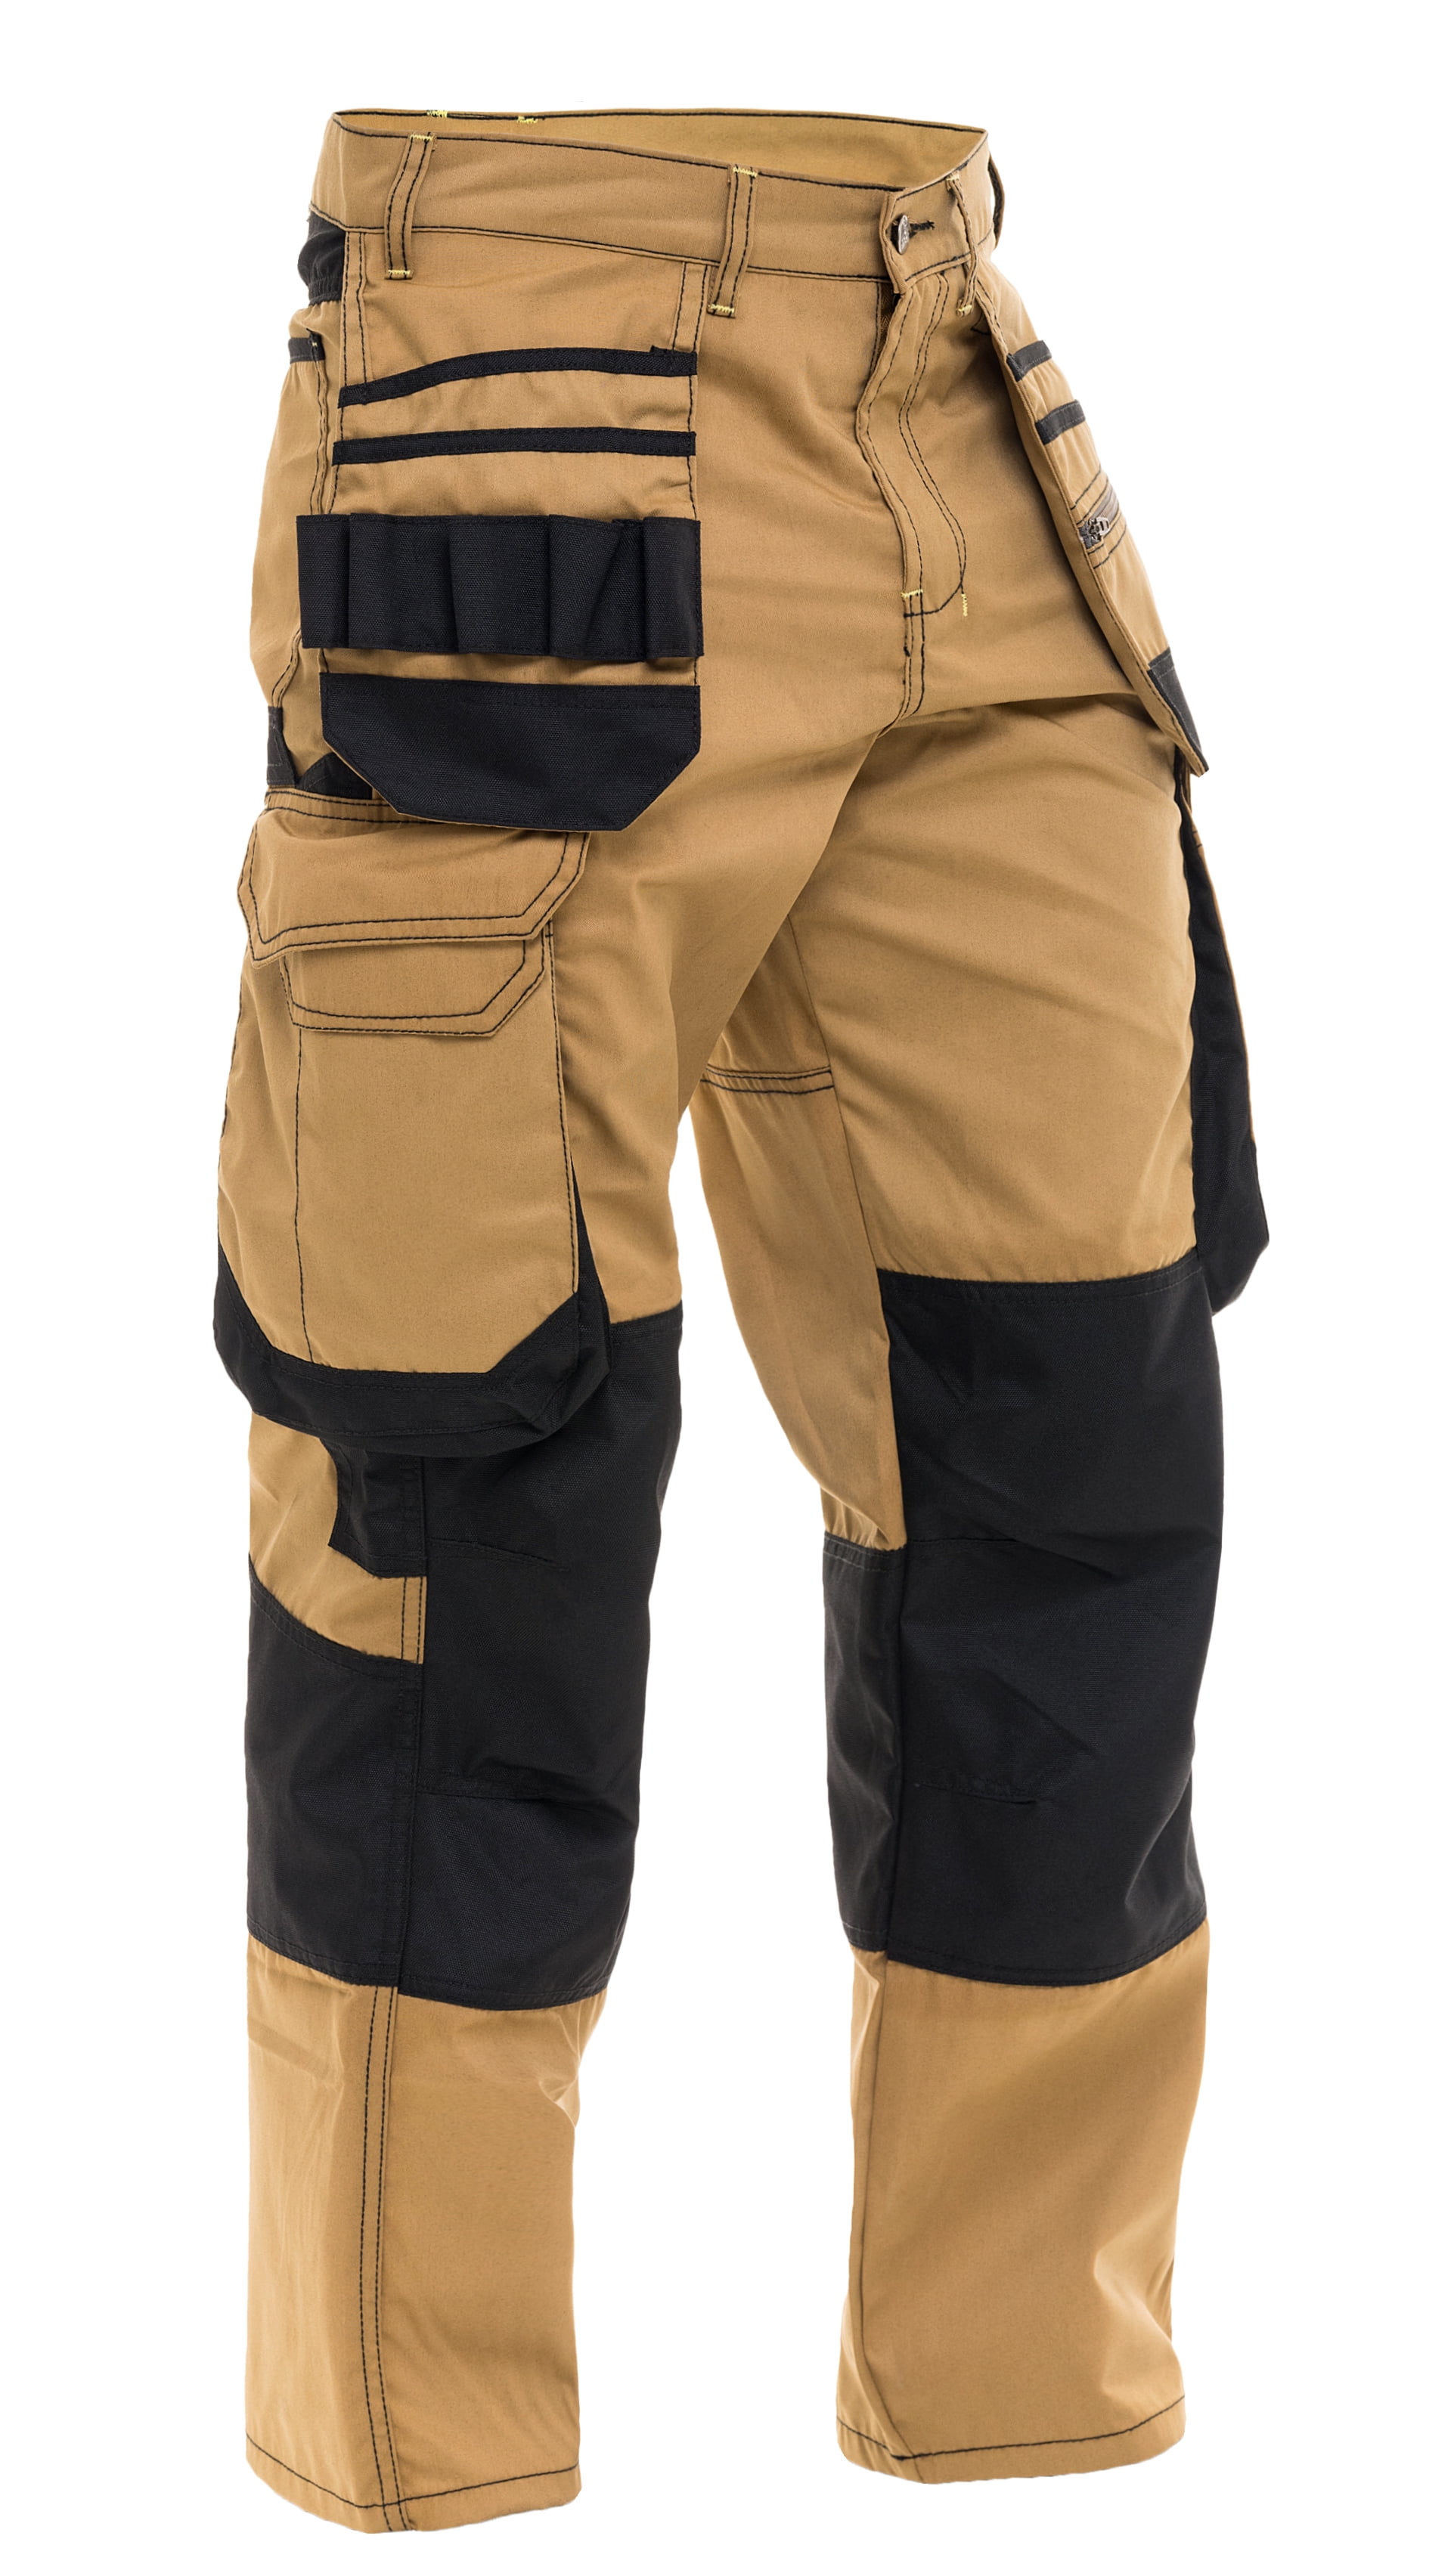 Heavy weight combat trousers